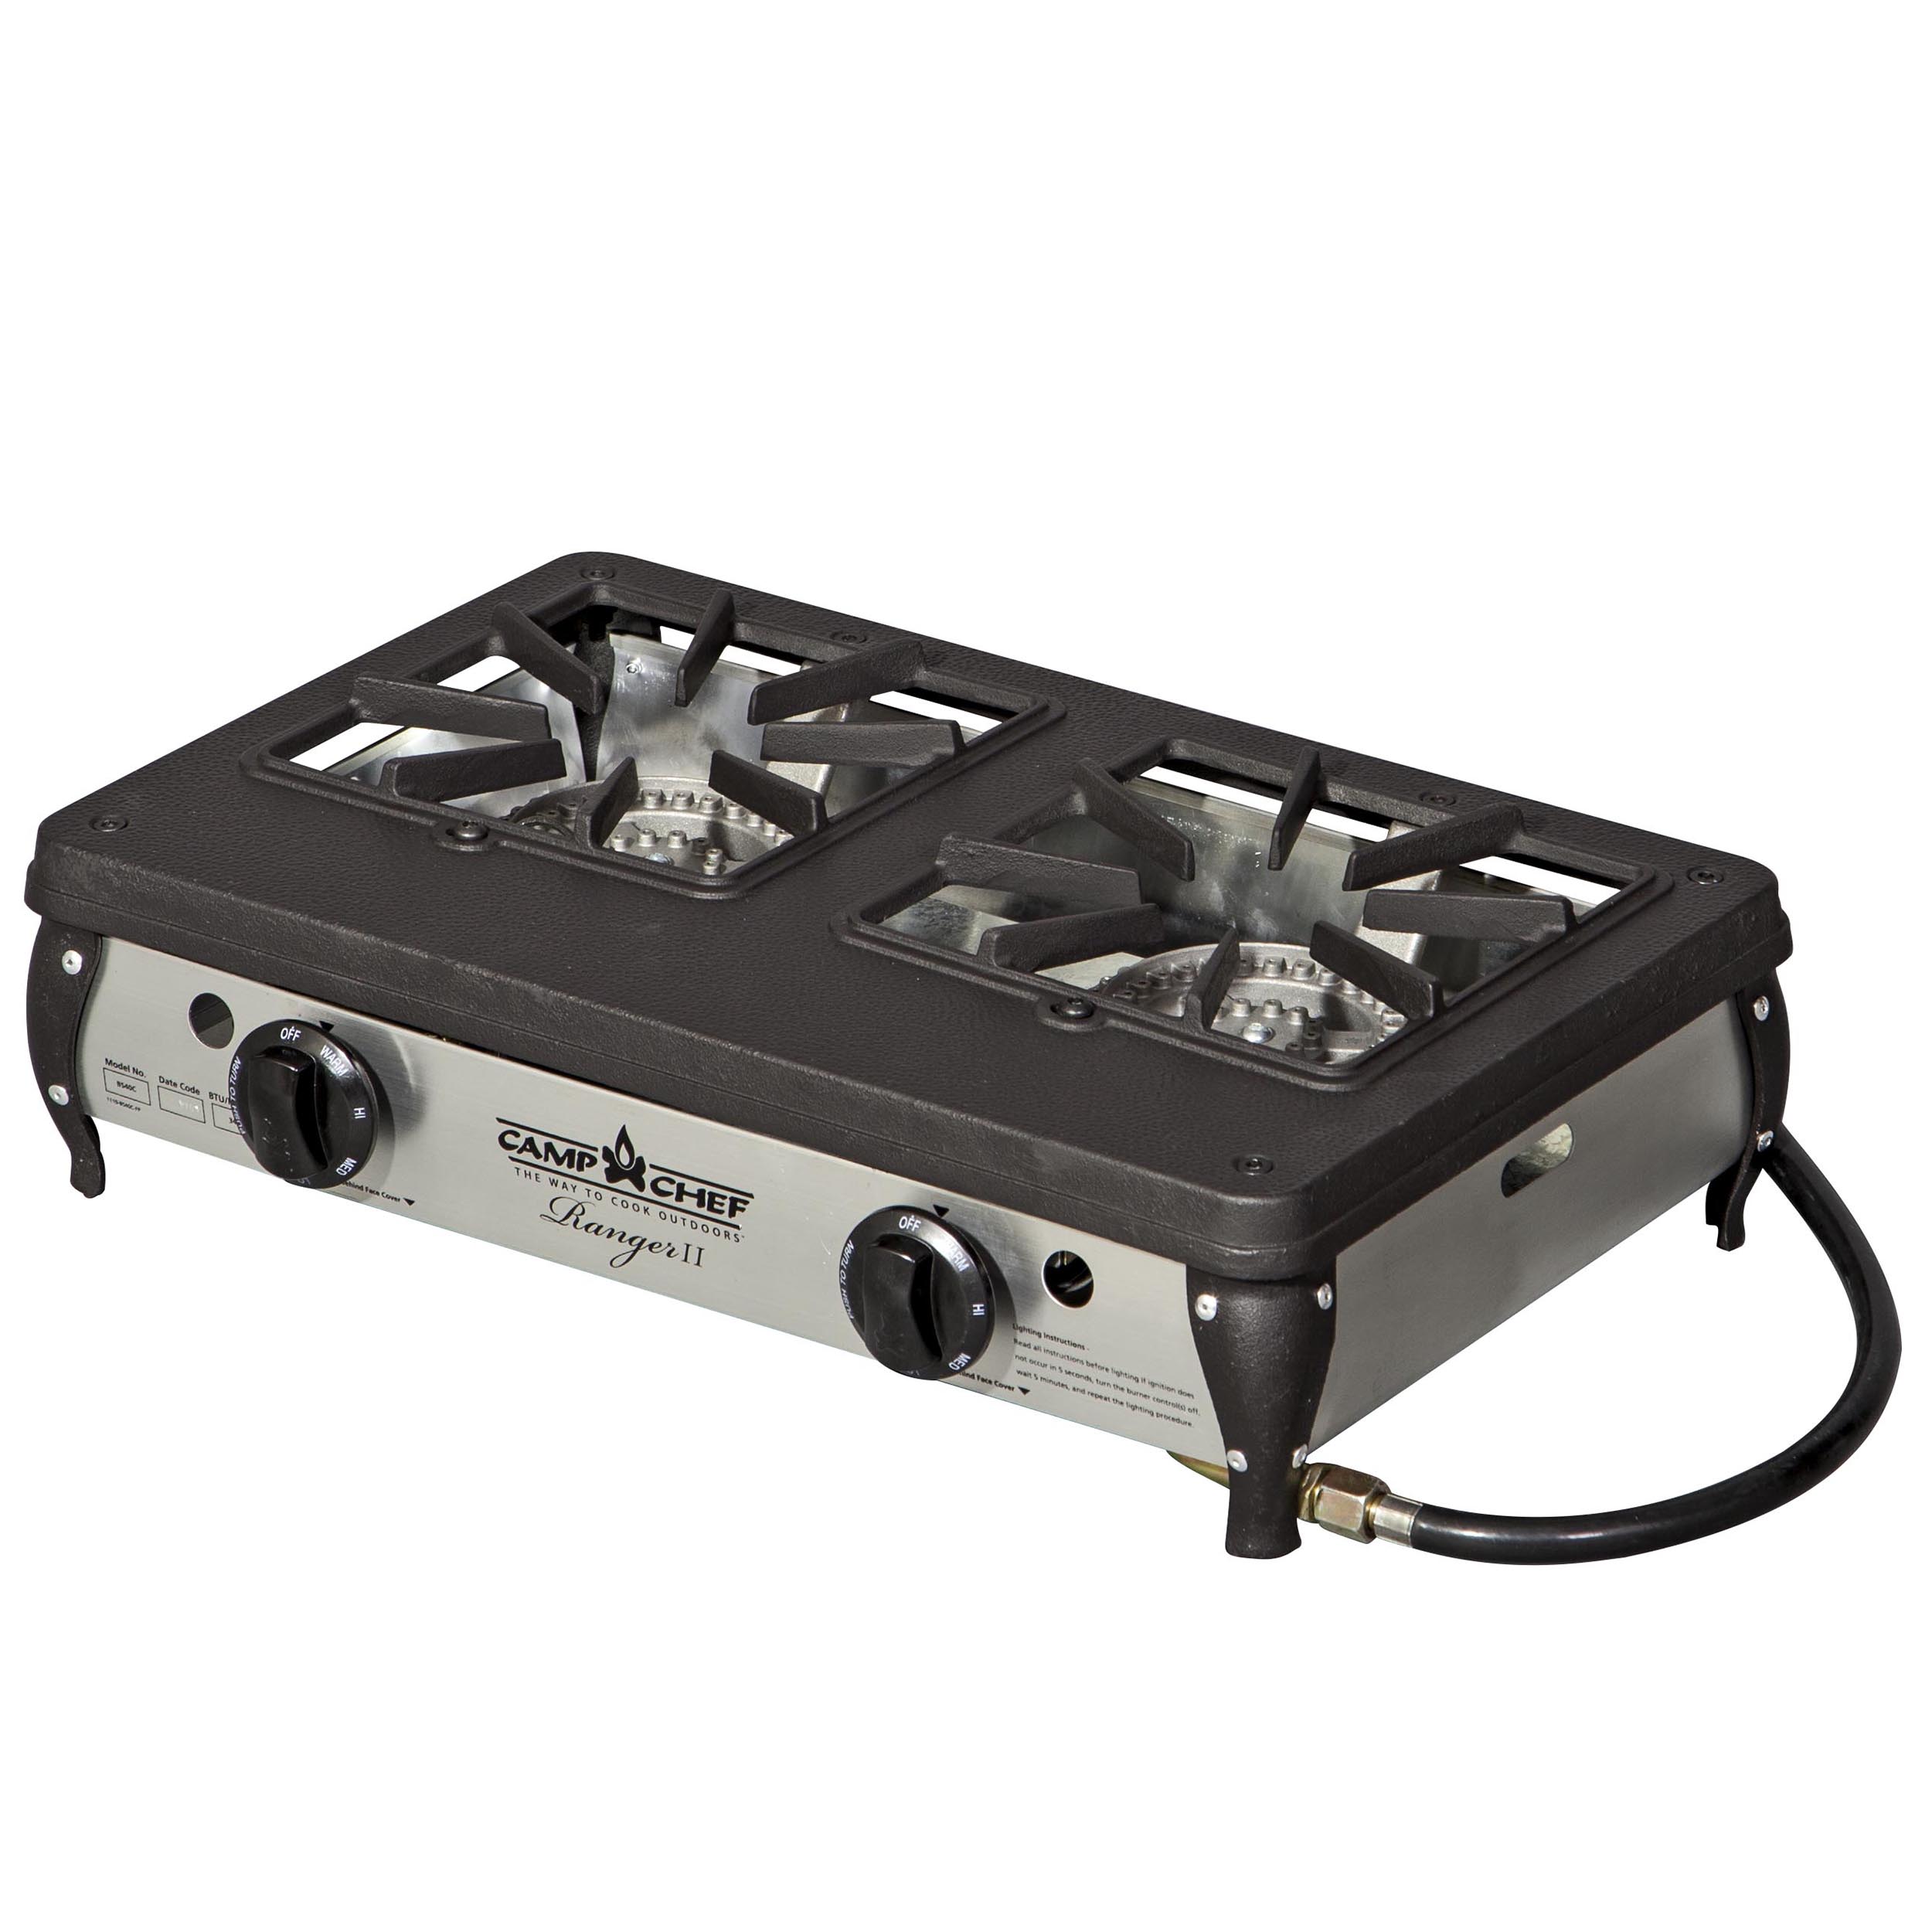 Camp Chef Ranger II Portable Outdoor 2 Burner Propane Stove, 34,000 BTU Total Output, 128 Sq Inch Cooking Area, BS40C - image 3 of 6